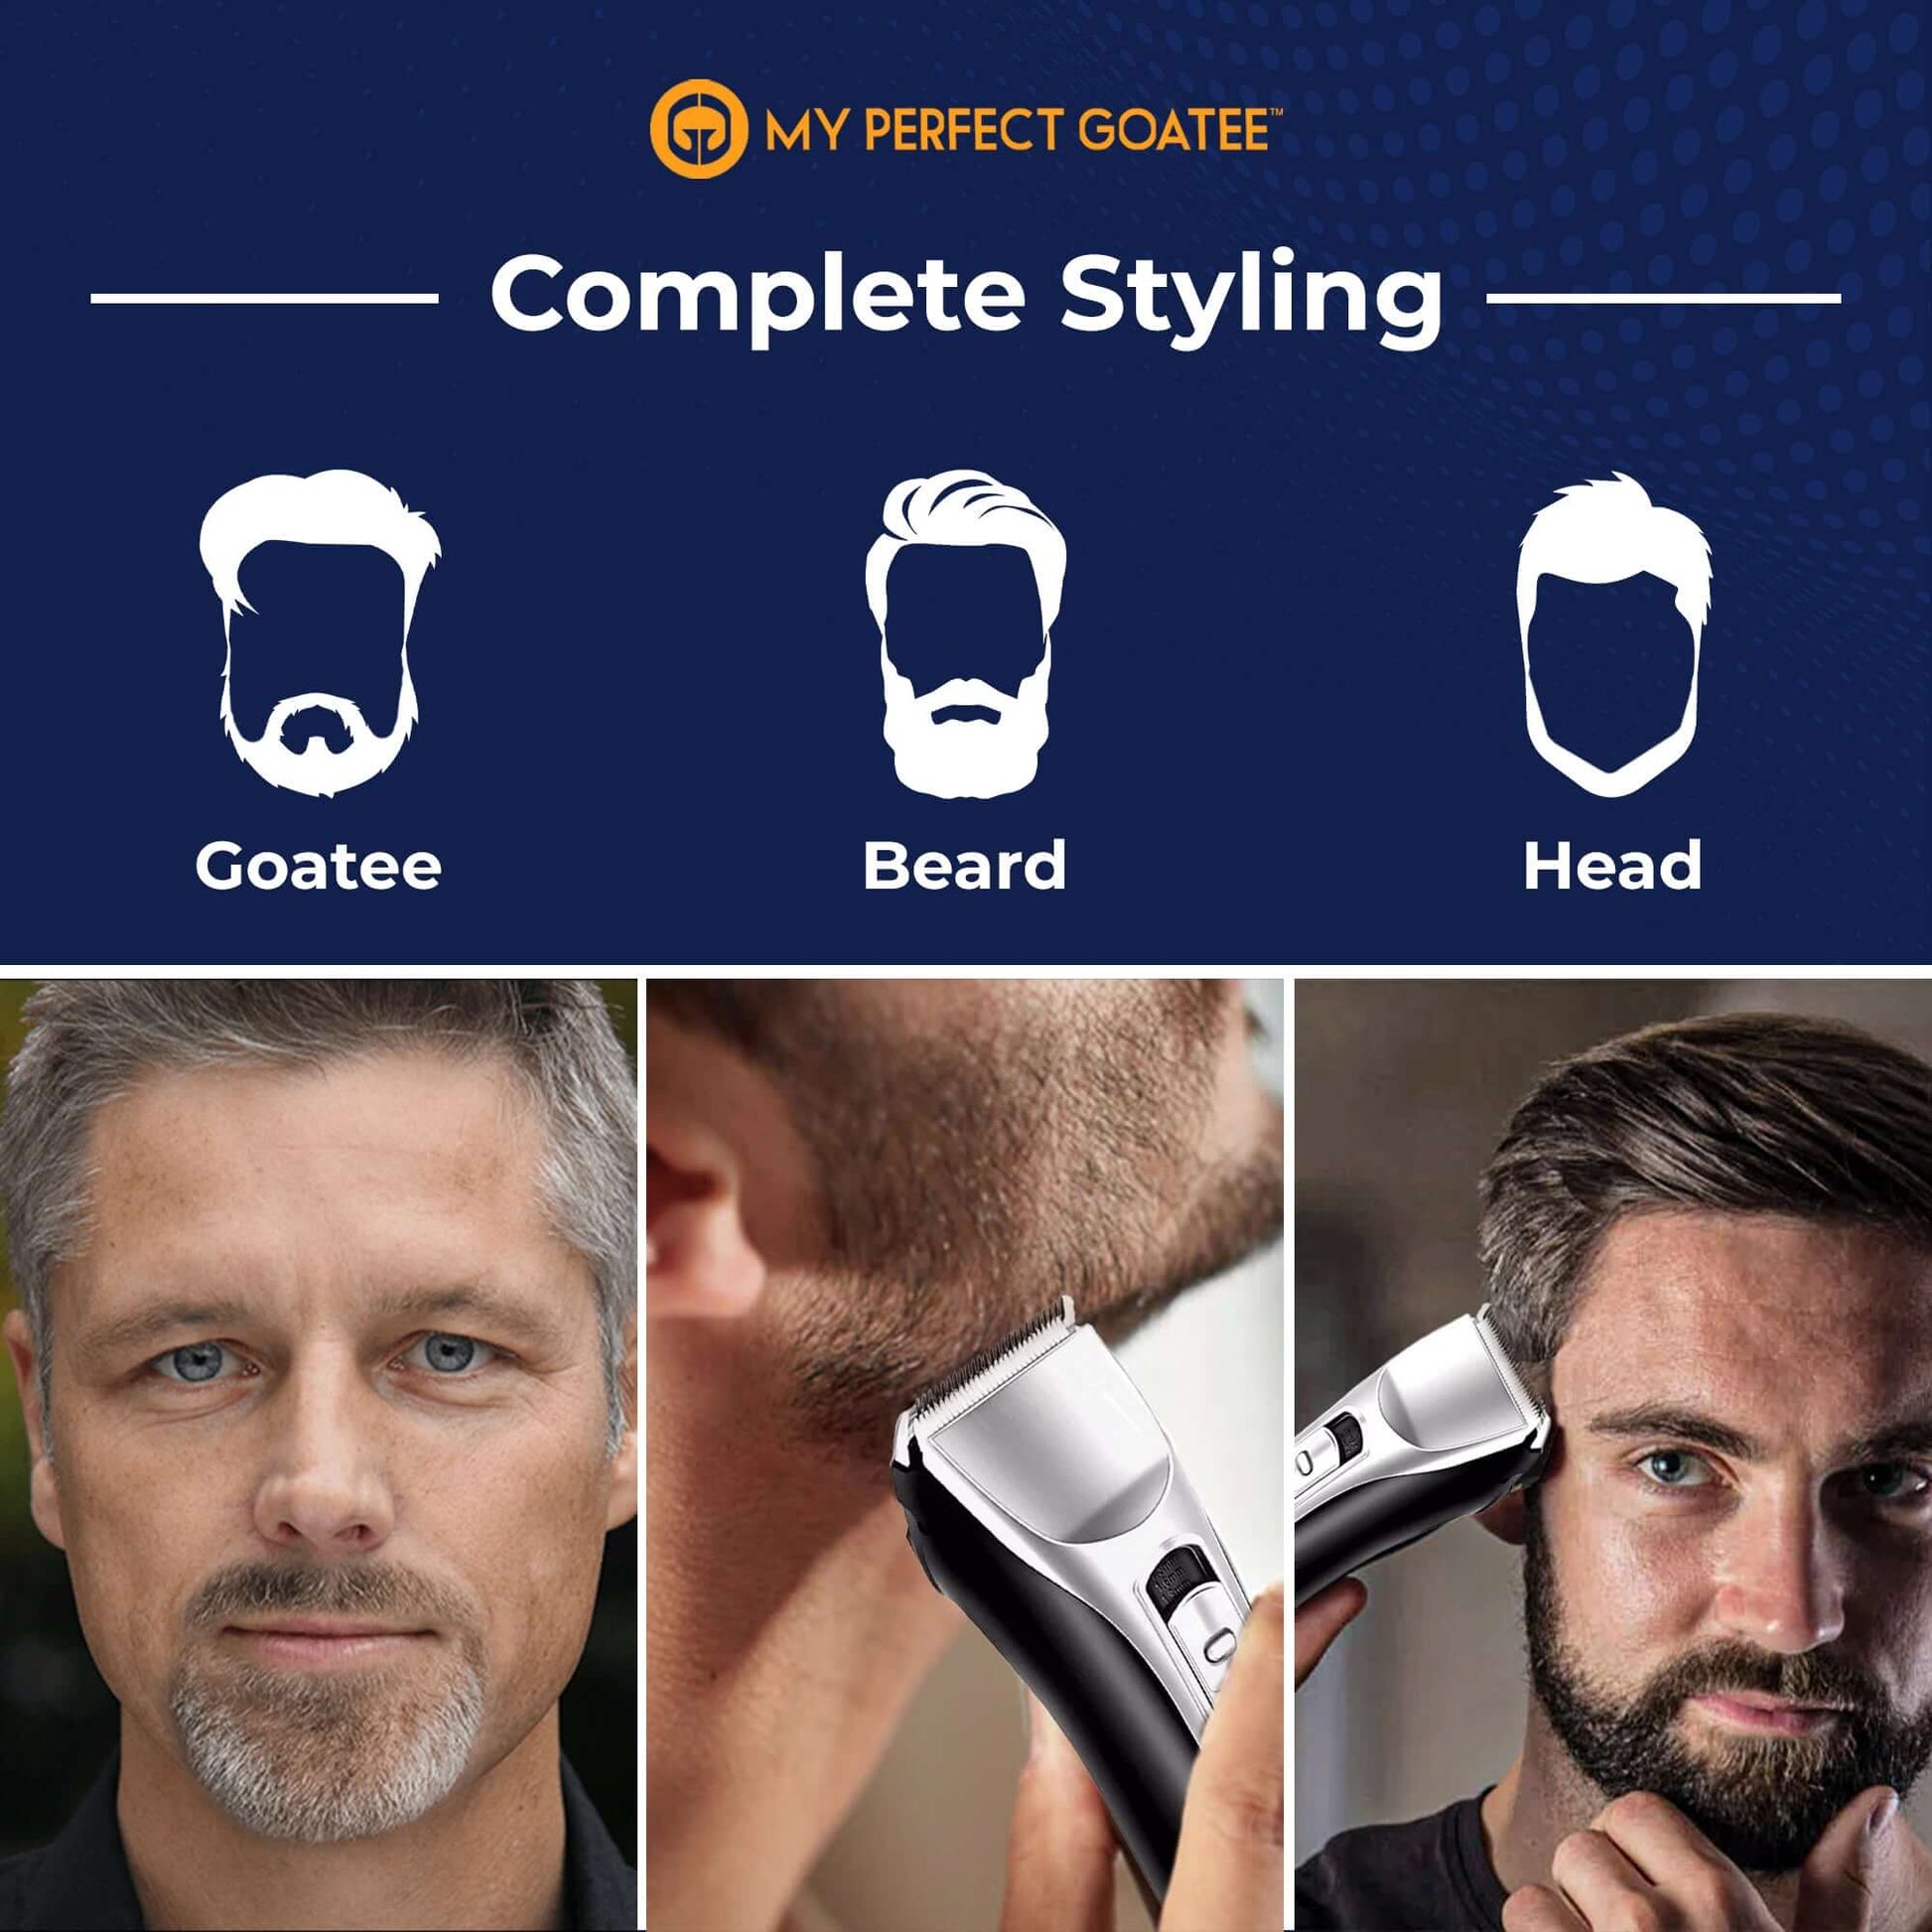 Image showcasing the My Perfect Goatee Shaving Trimmer used for achieving a complete and stylish goatee beard look